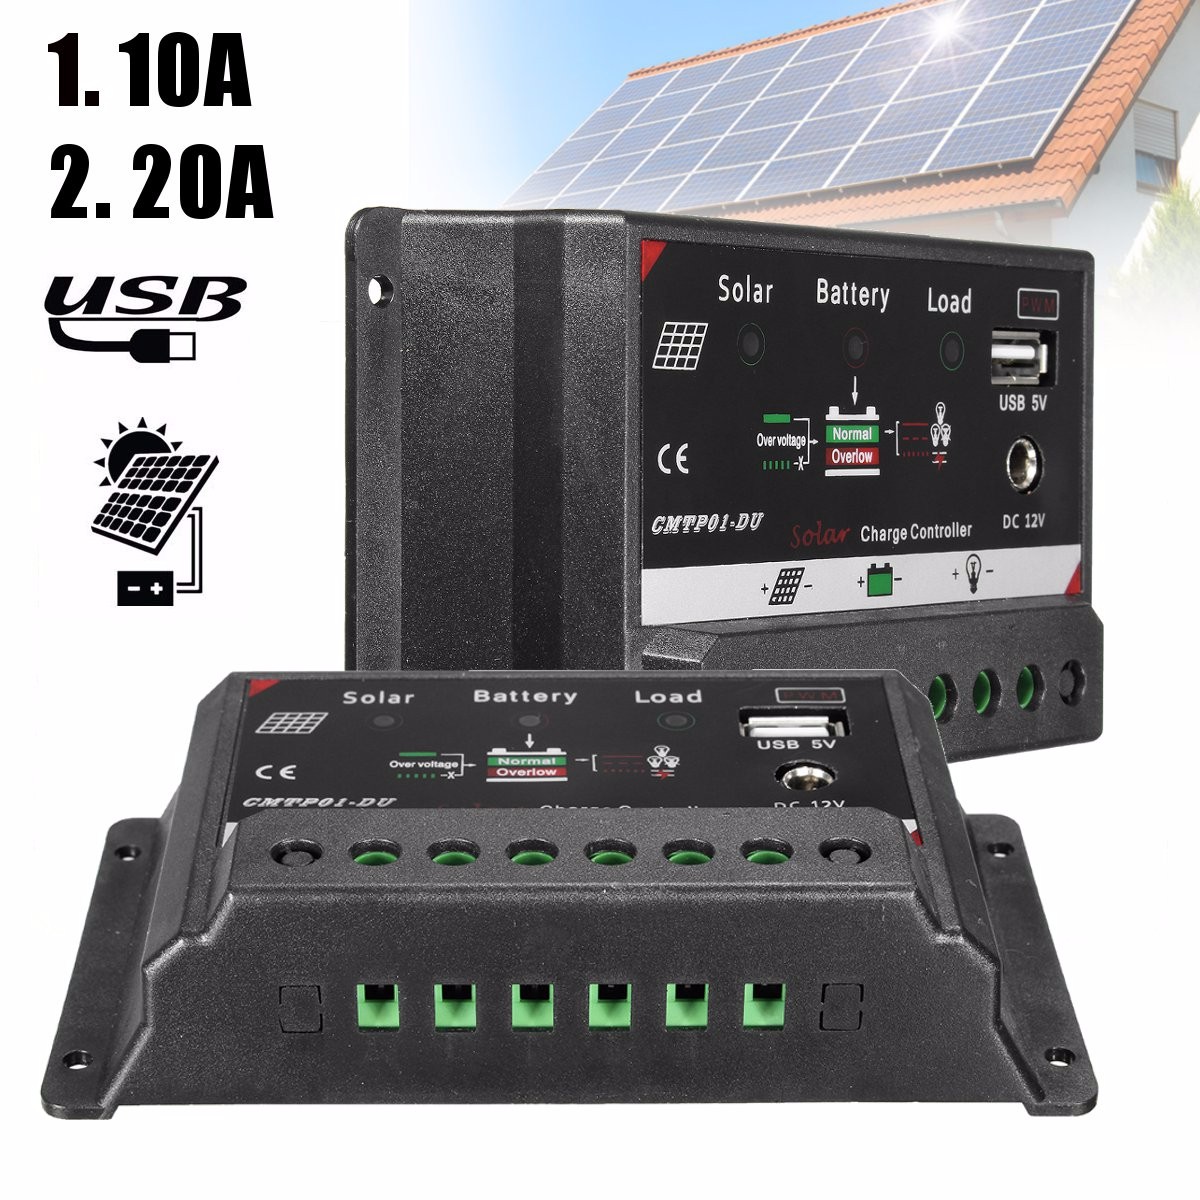 1020A-LED-Auto-PWM-Solar-Panel-Battery-Regulator-Charge-Controller-DC12V-Output-1089462-1